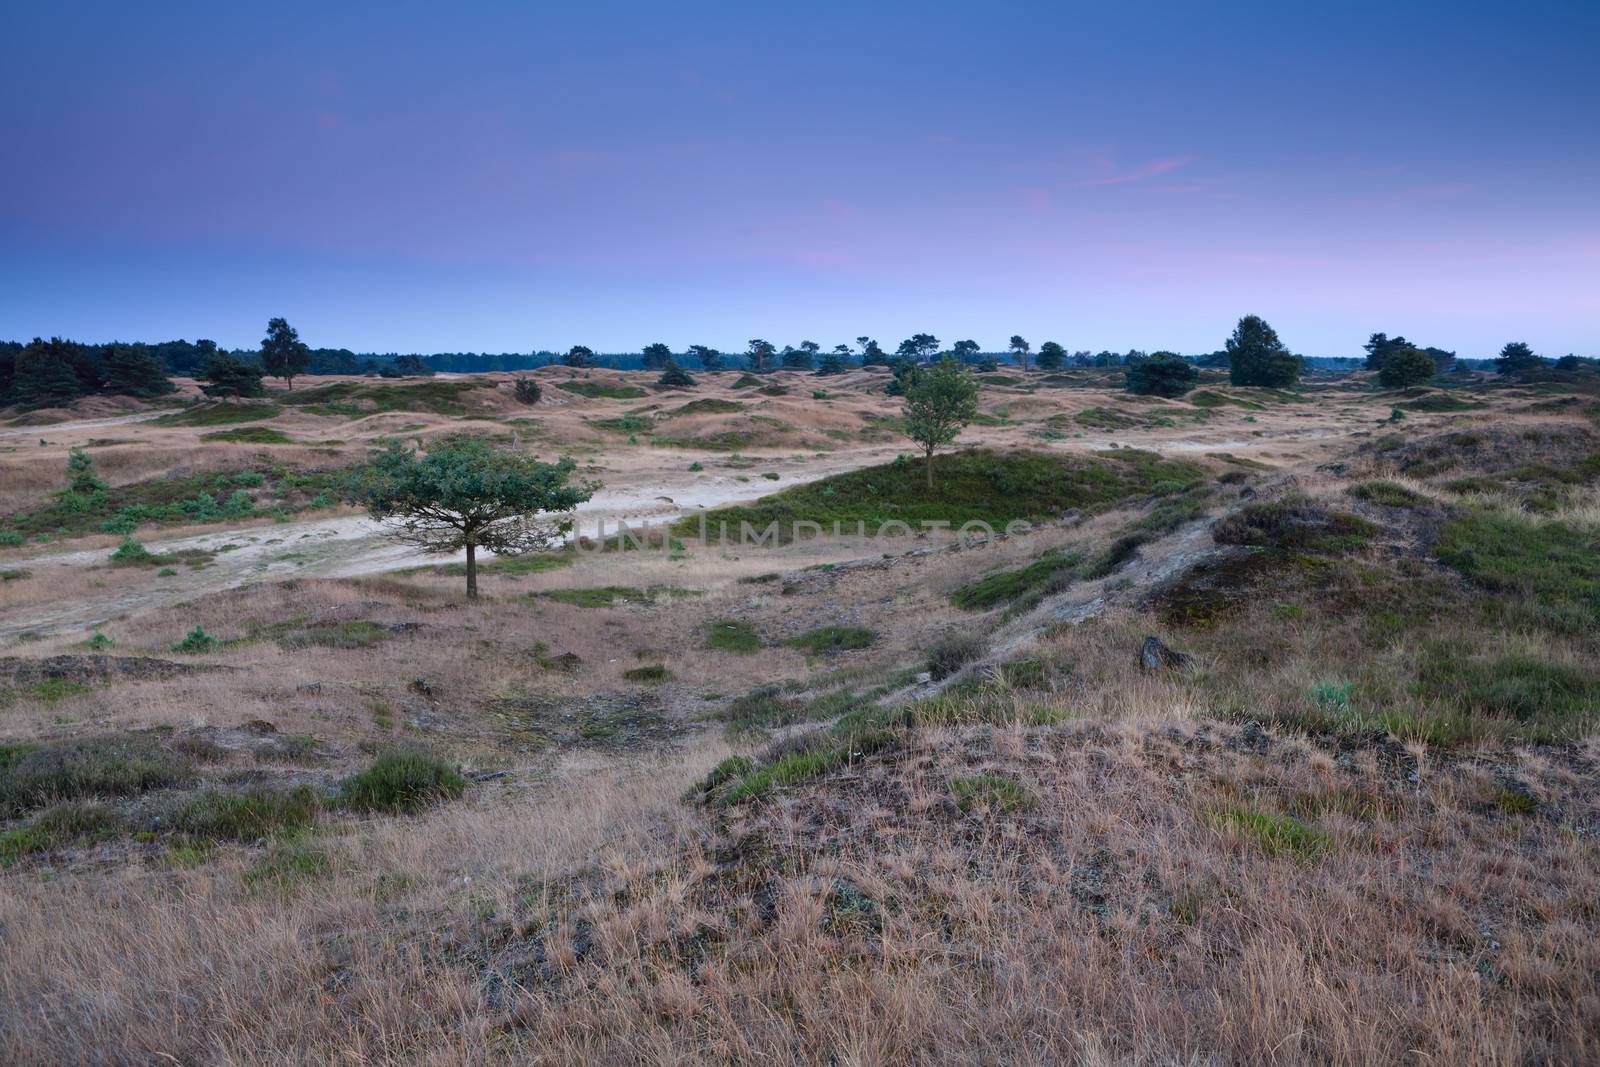 hills and dunes in dusk, Drents-Friese Wold, Netherlands